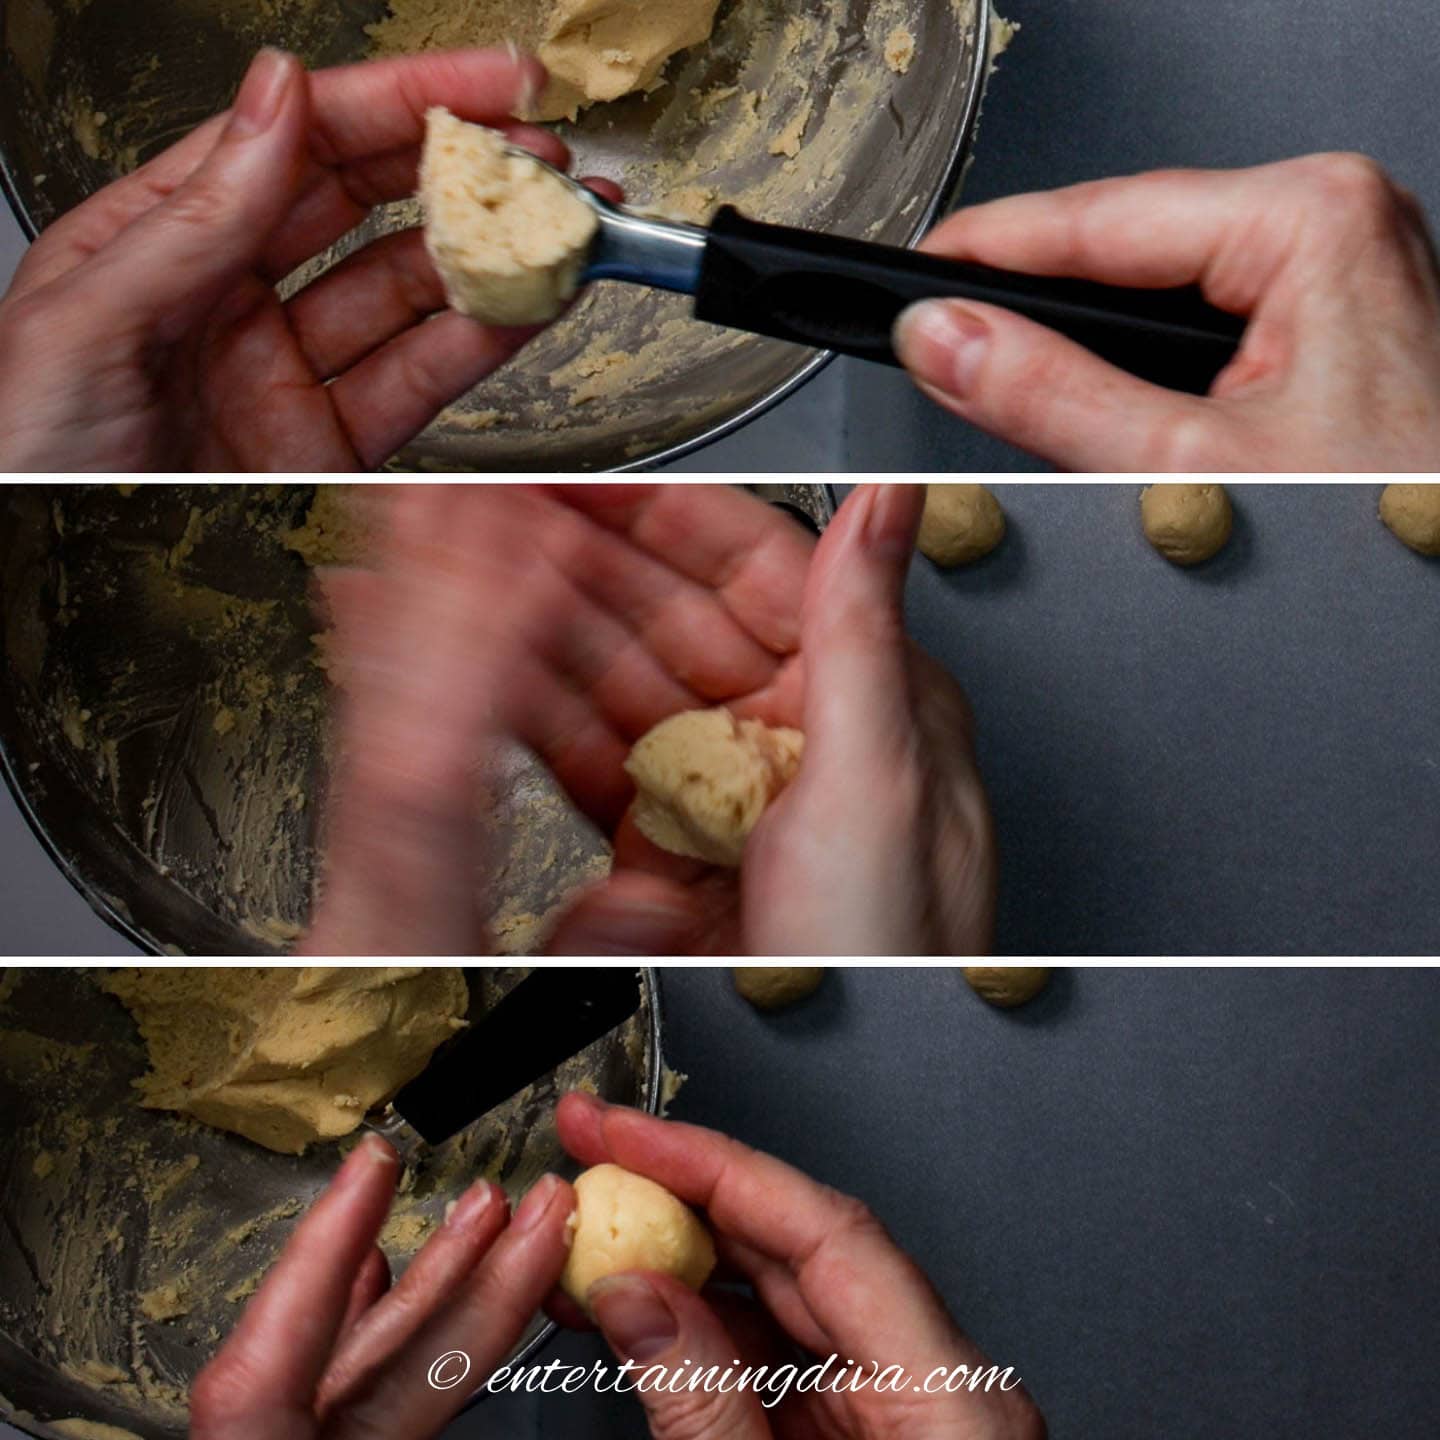 How to make 1 inch balls from the cookie dough with a melon baller